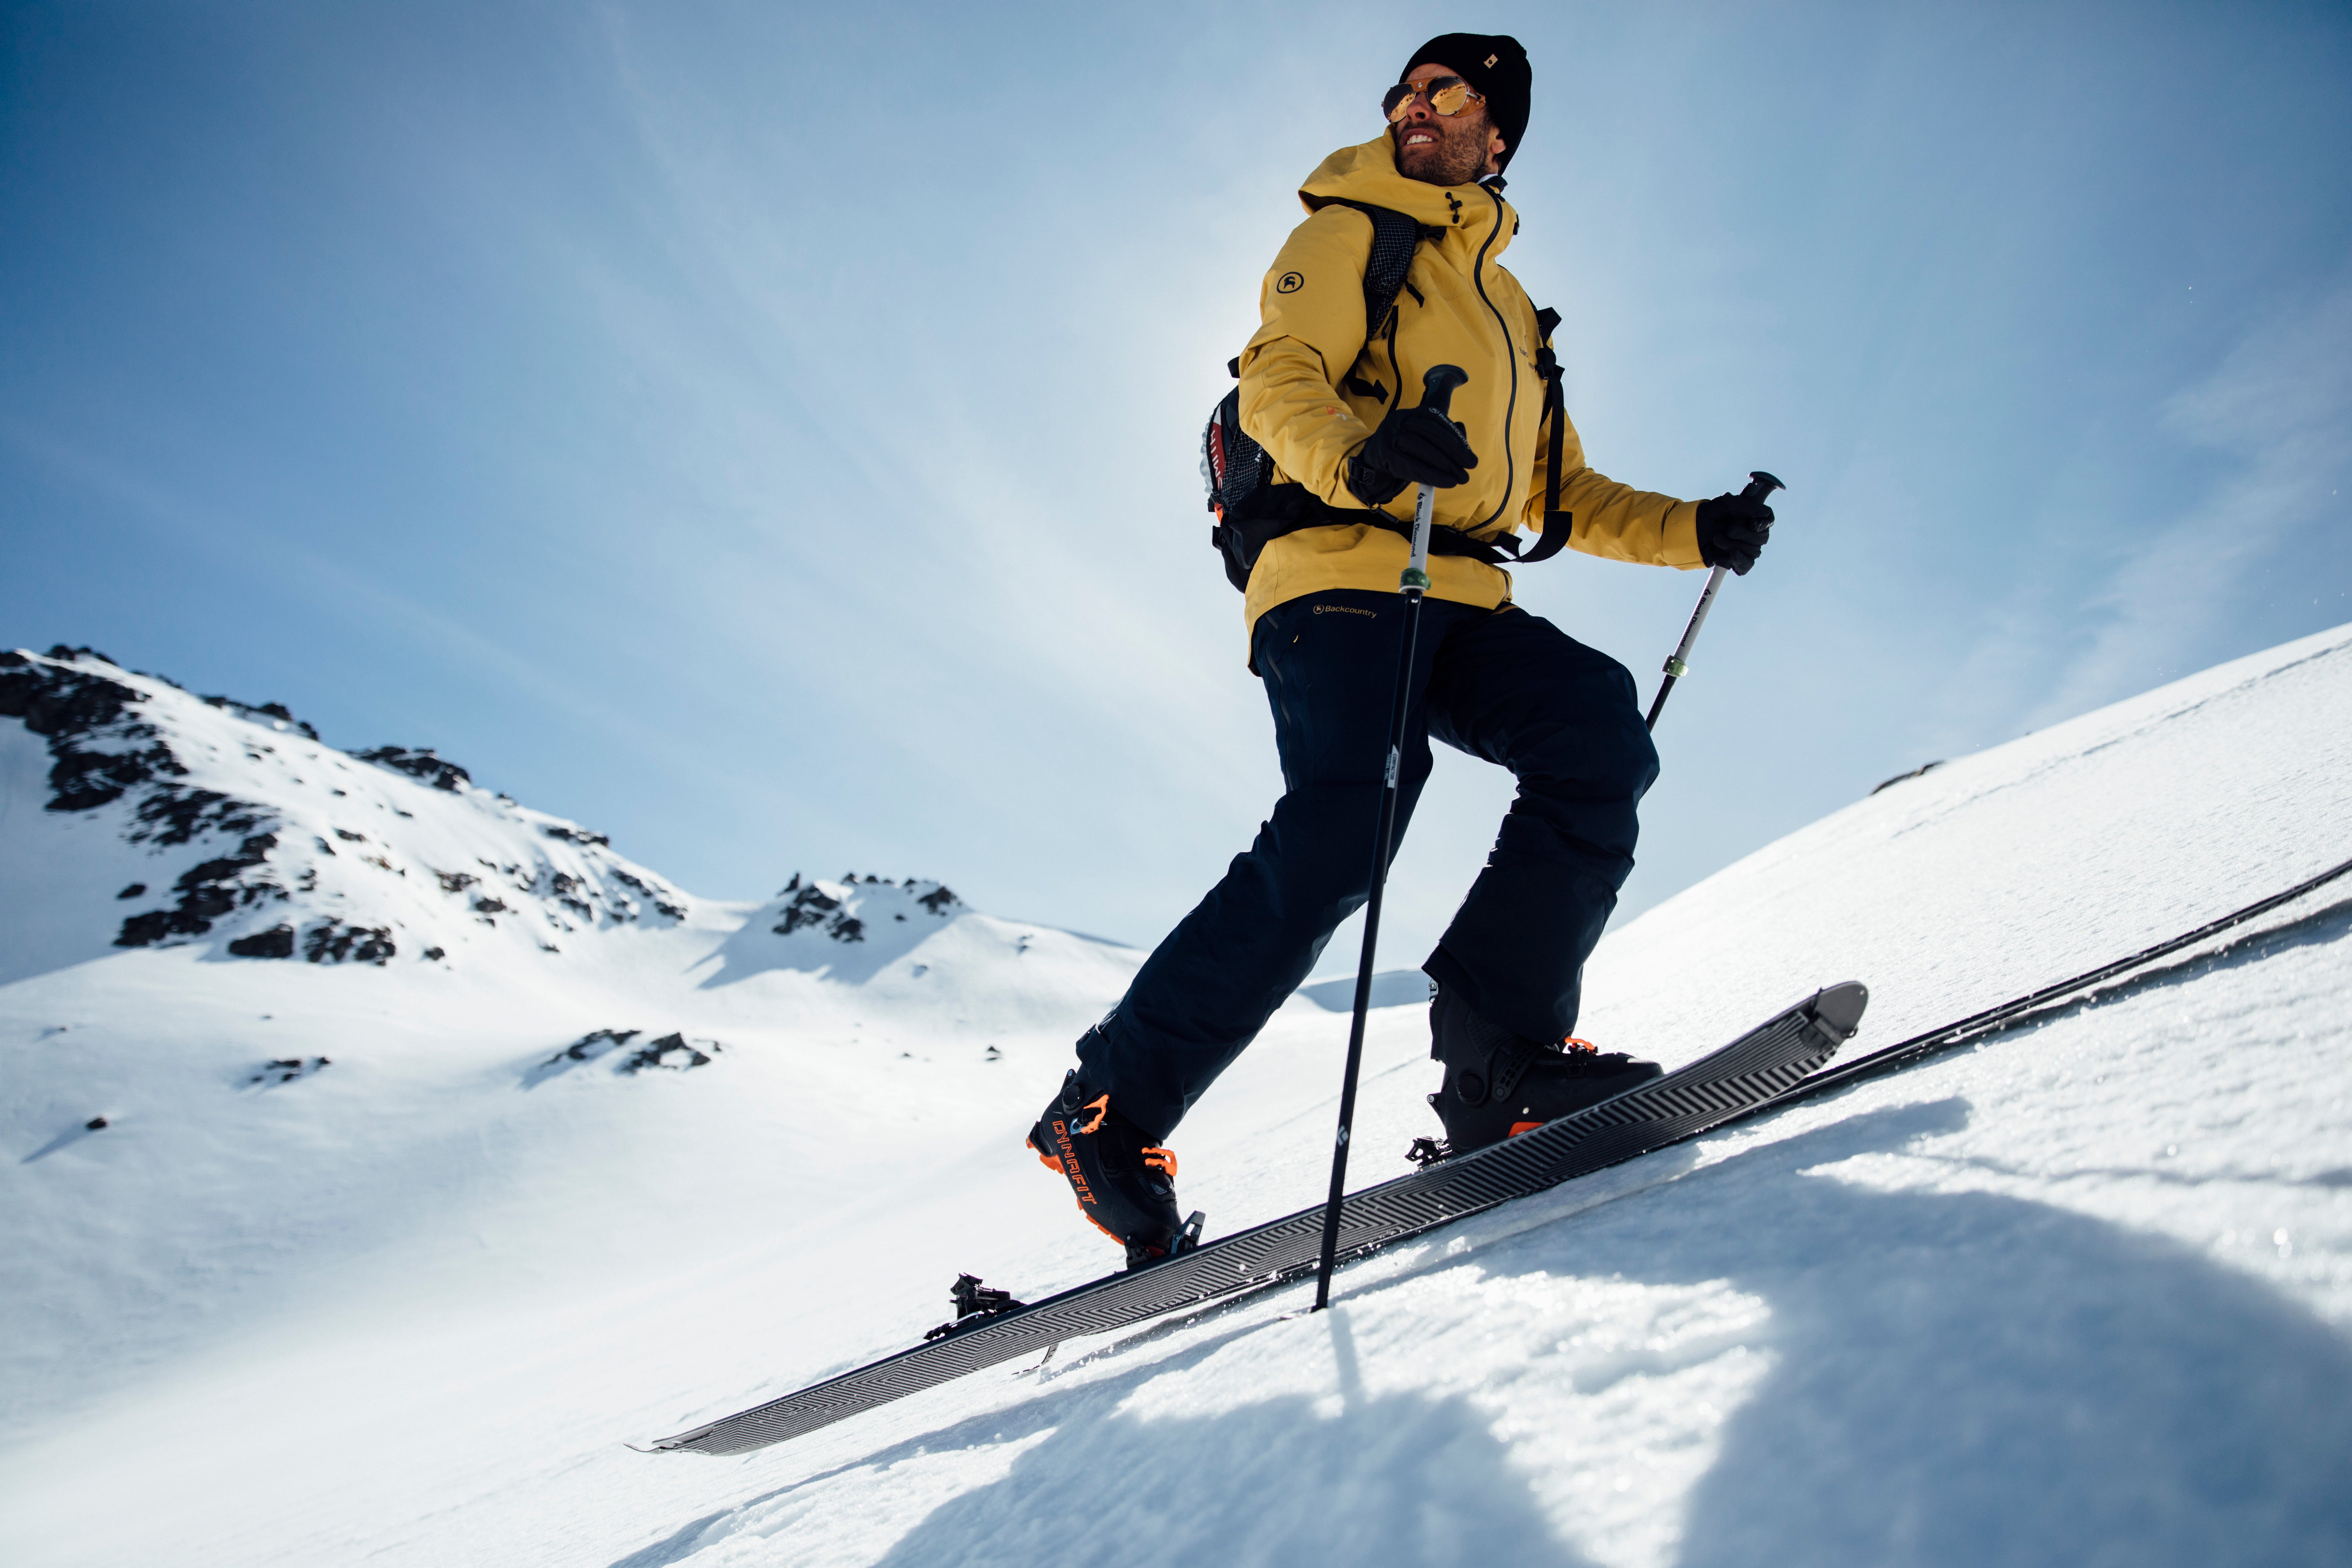 Ski touring or off-piste skiing with a guide